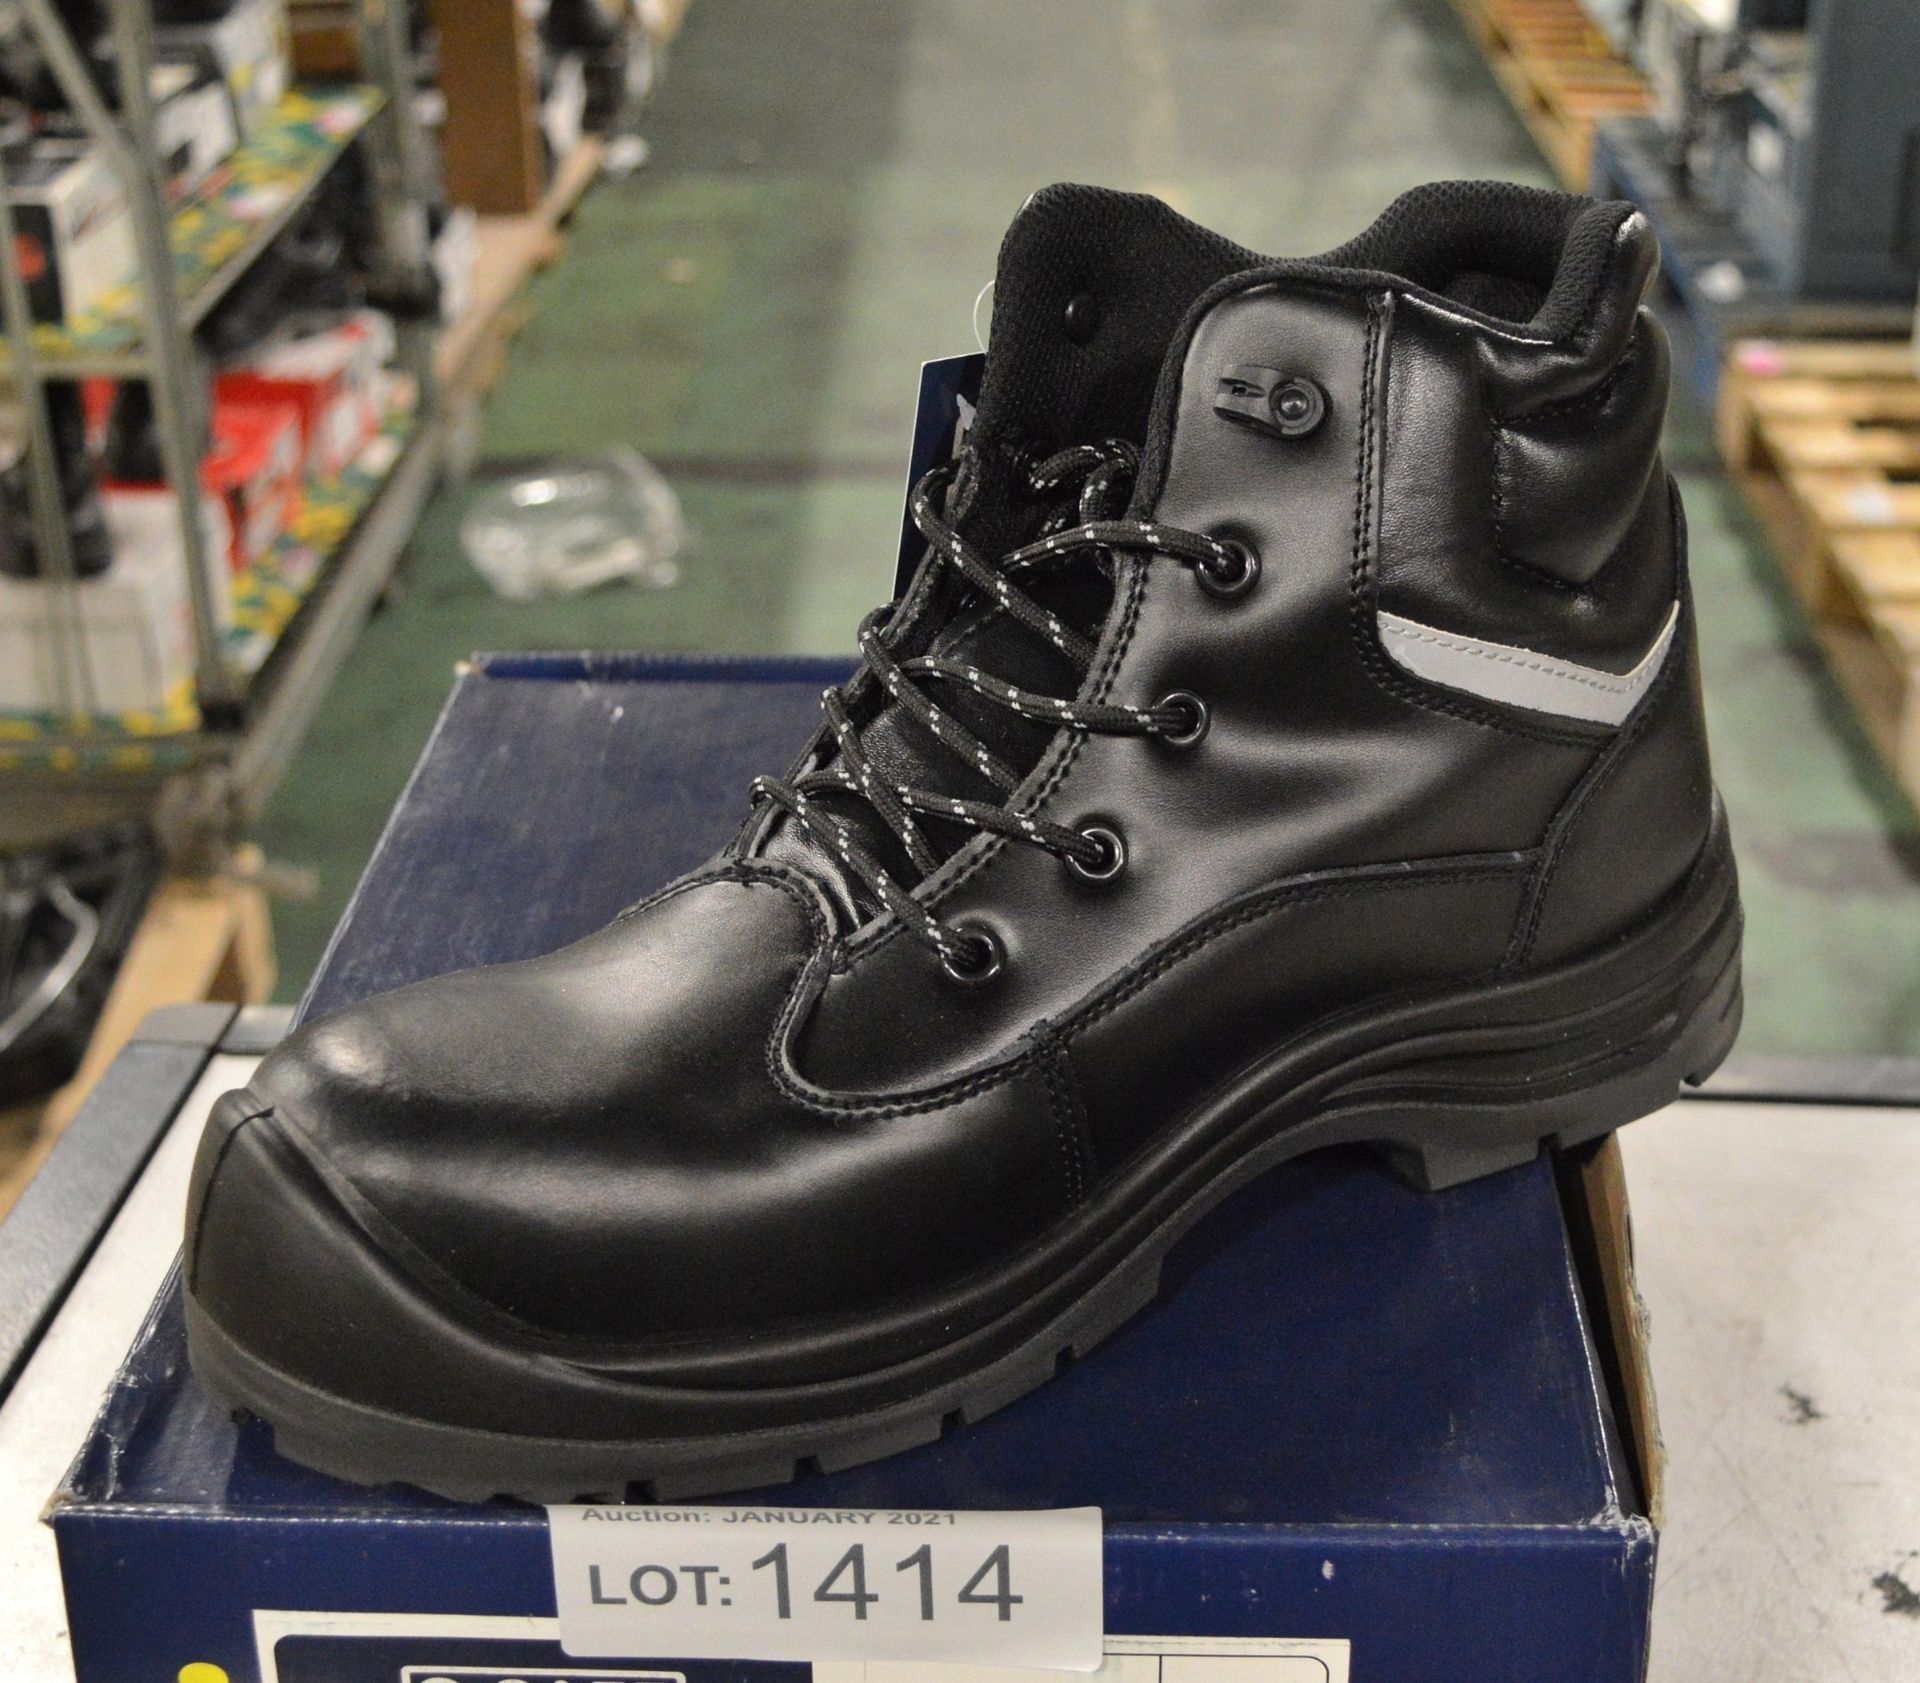 Safety boots - Q-safe non metallic safety boot QS7031 - 10.5UK 45EU - Image 2 of 2